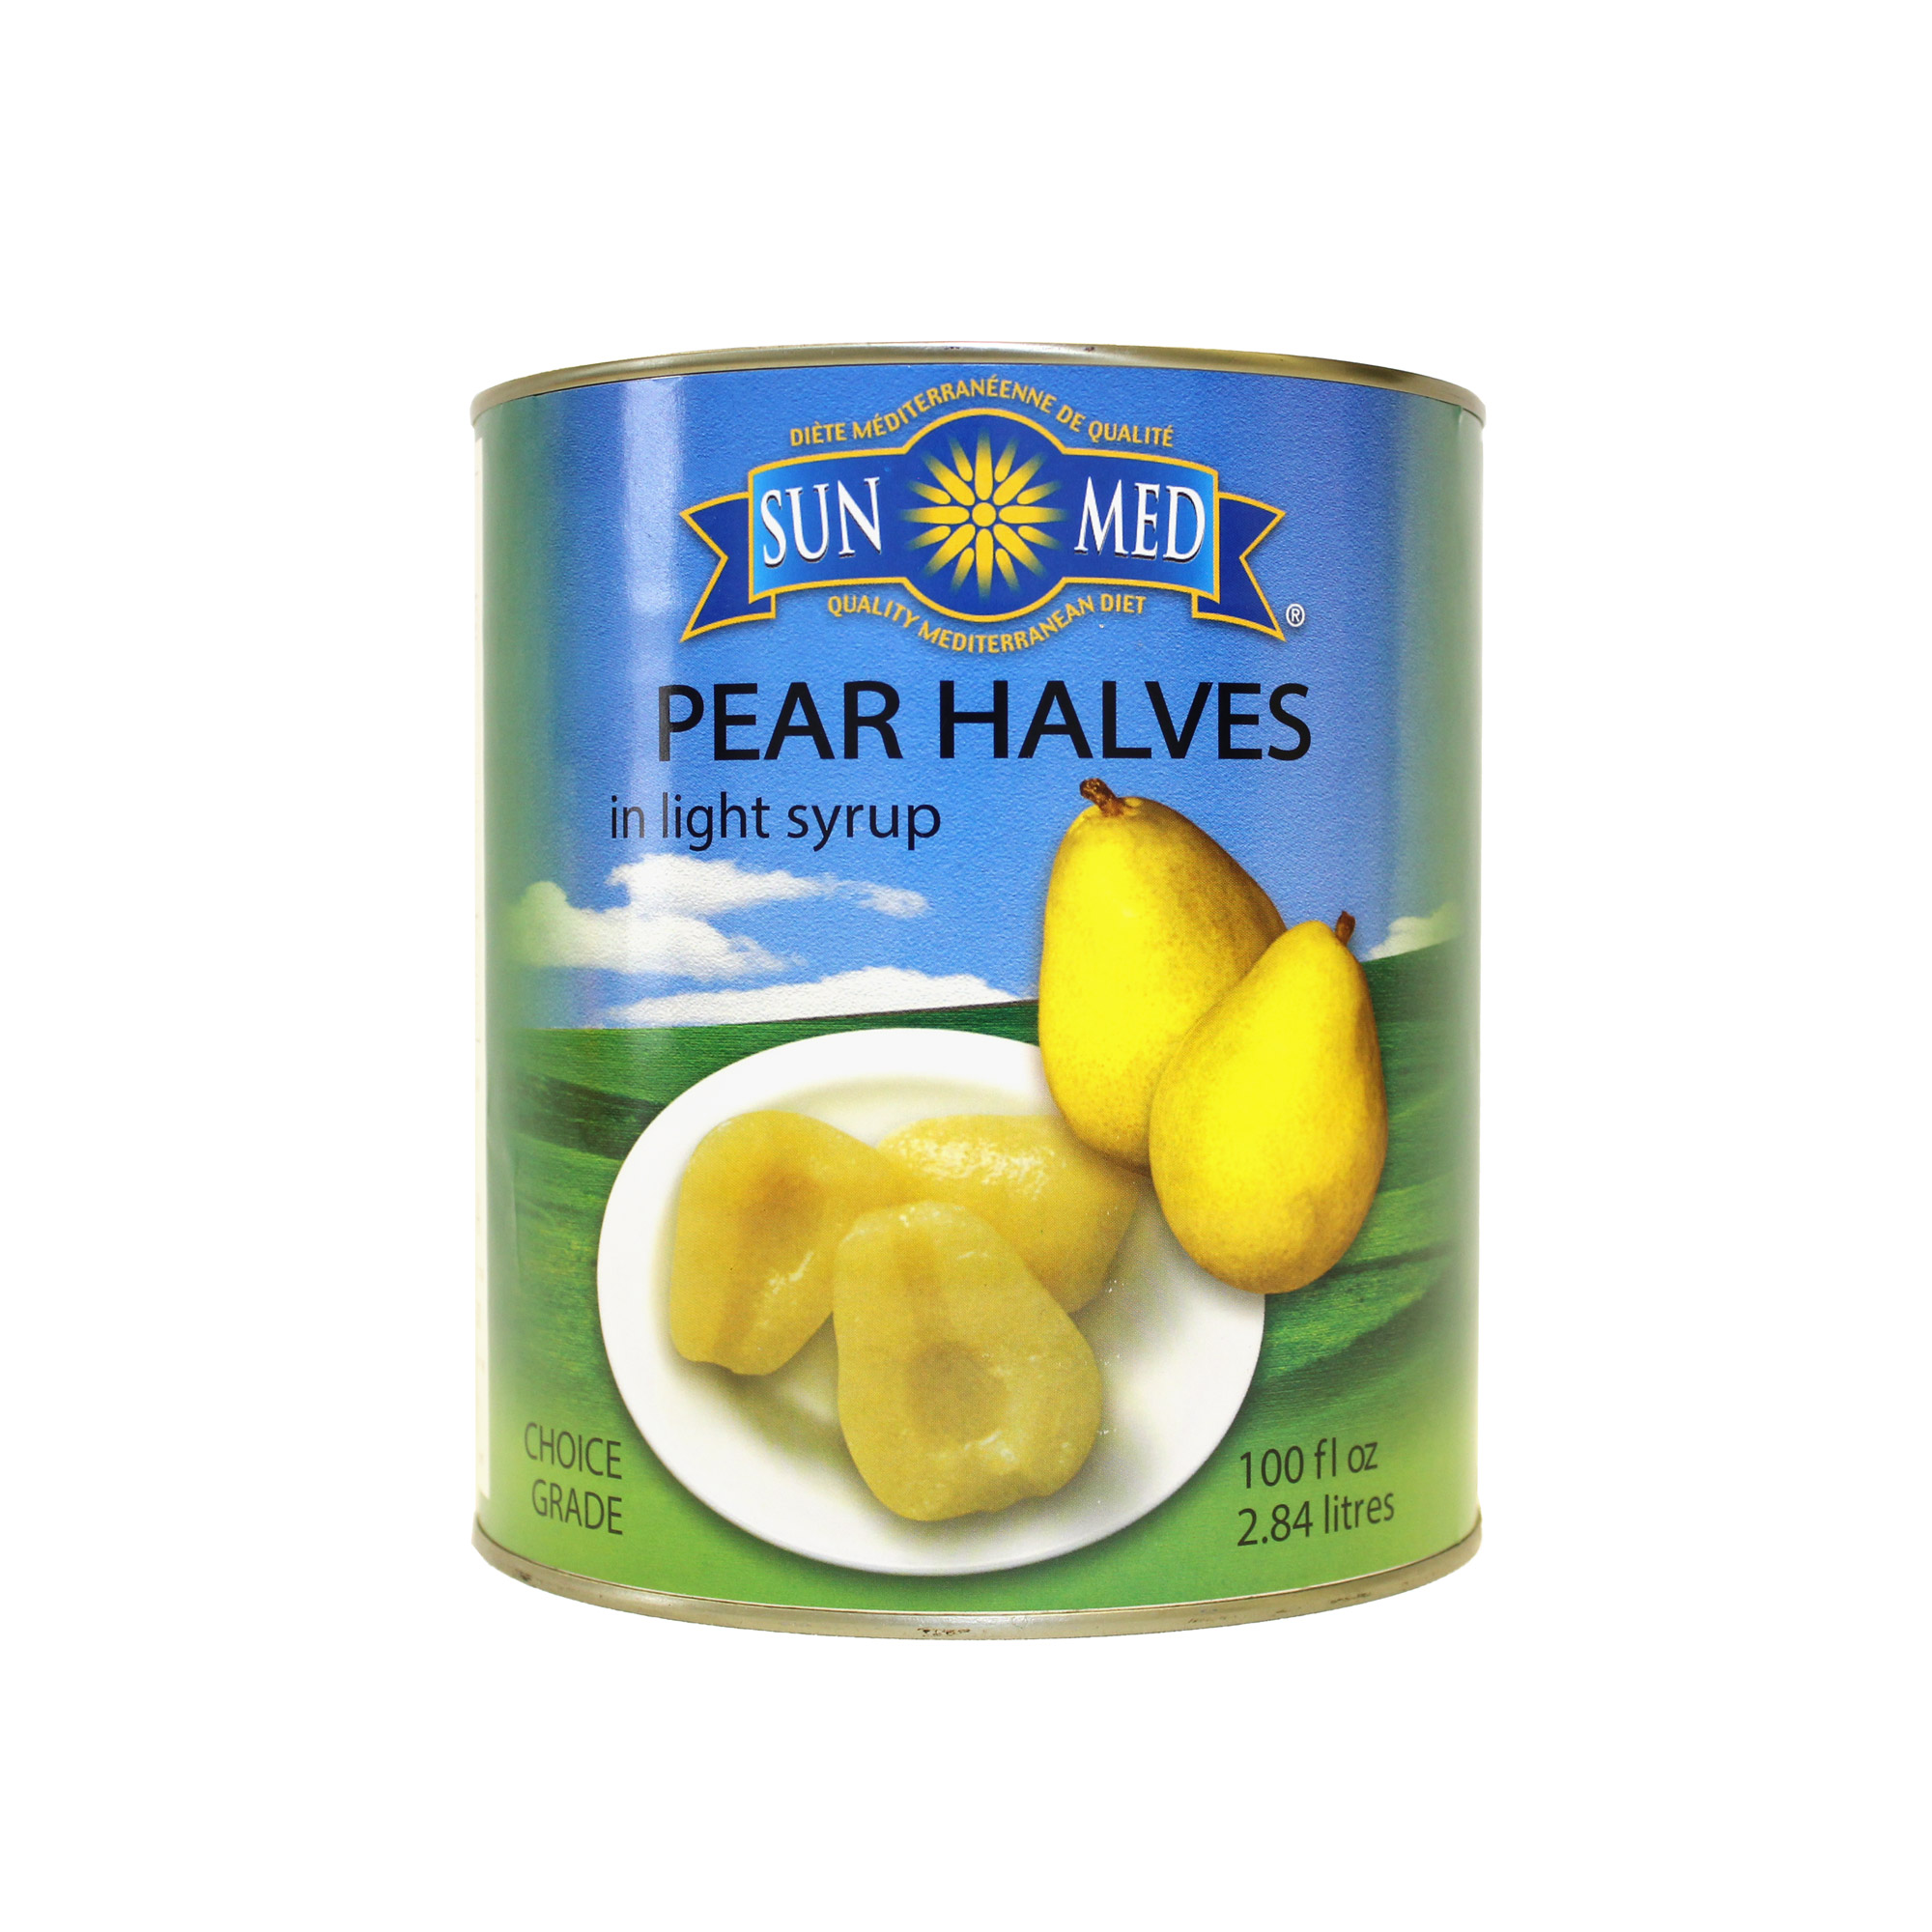 Pear halves in light syrup – 796ml